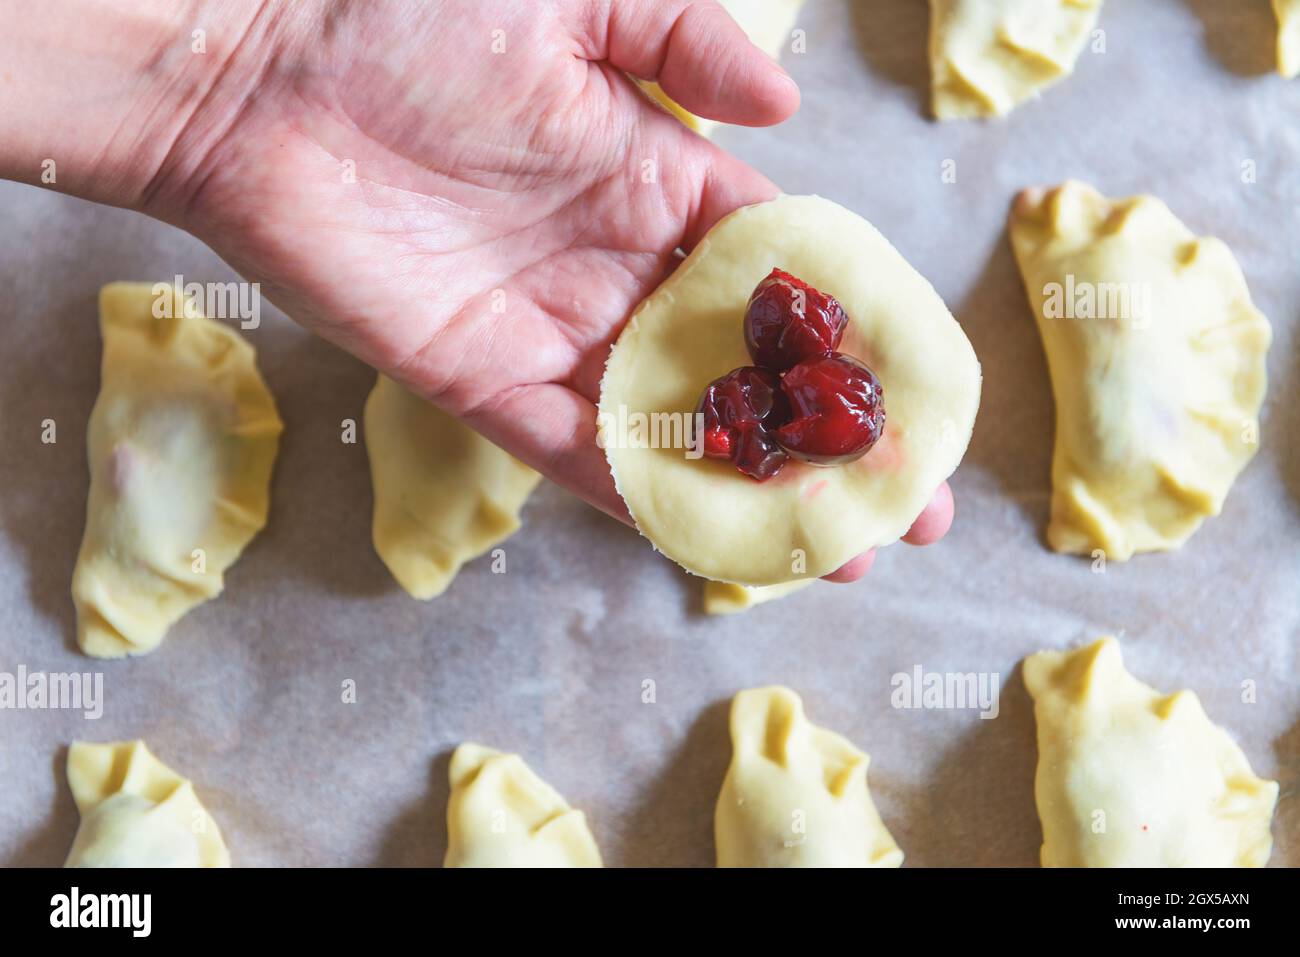 Making dumplings filled with sour cherry with sugar Stock Photo